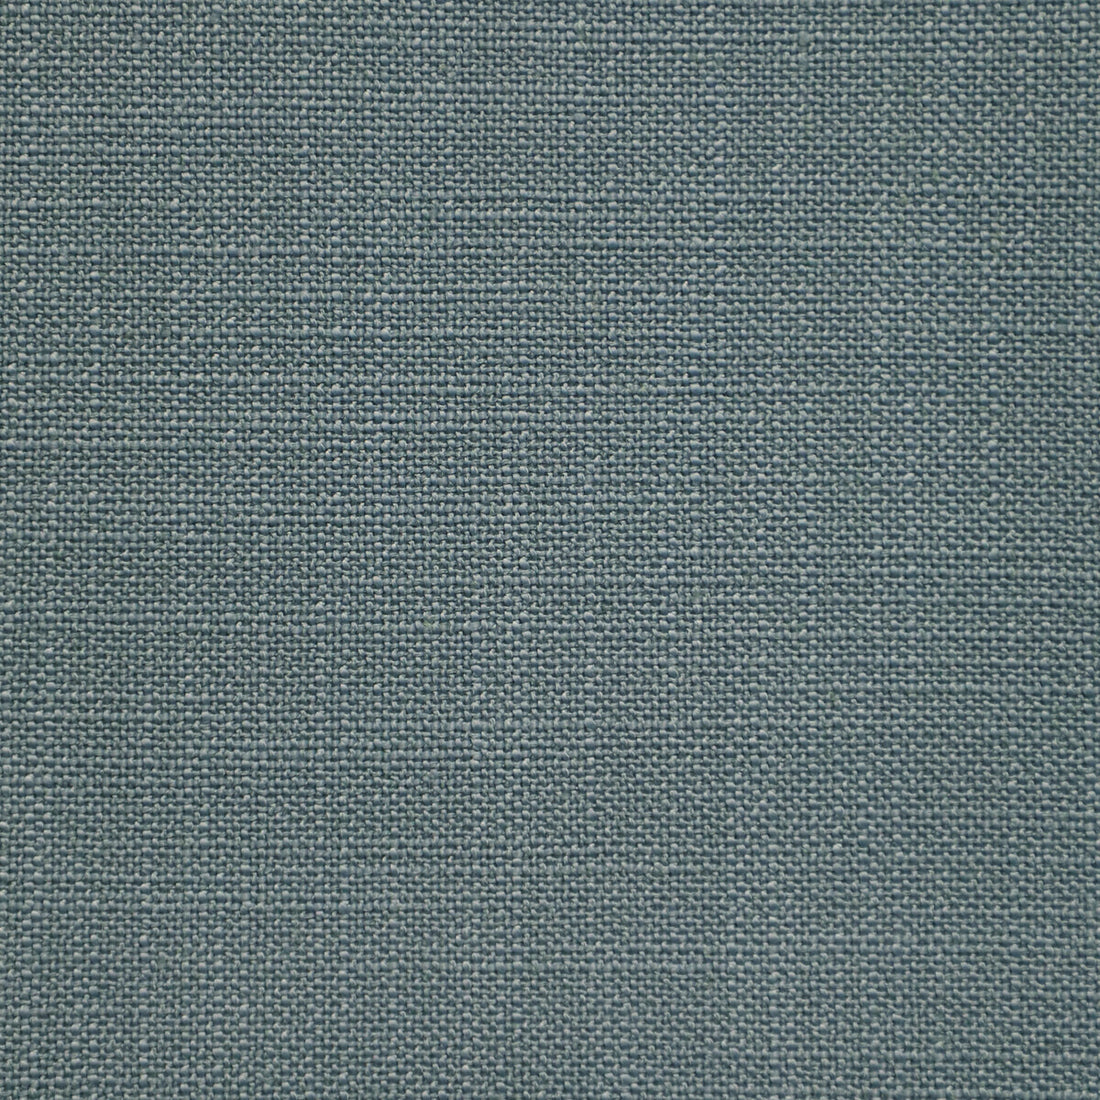 Kravet Smart fabric in 35987-23 color - pattern 35987.23.0 - by Kravet Smart in the Performance Crypton Home collection